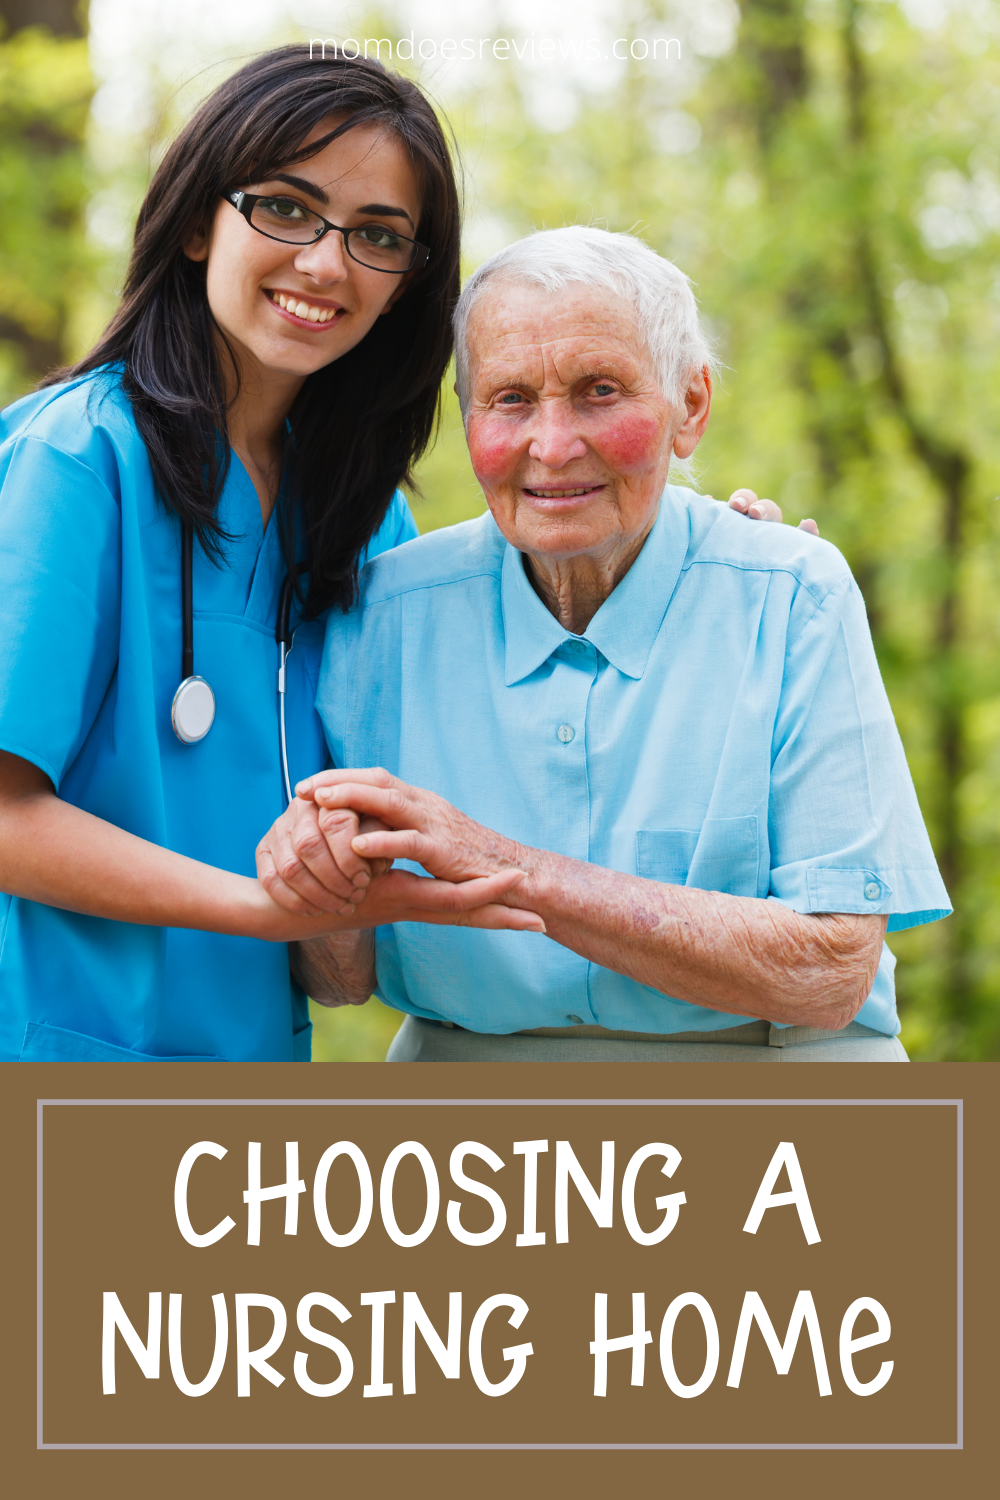 8 Questions to Ask When Choosing a Nursing Home for Your Loved One